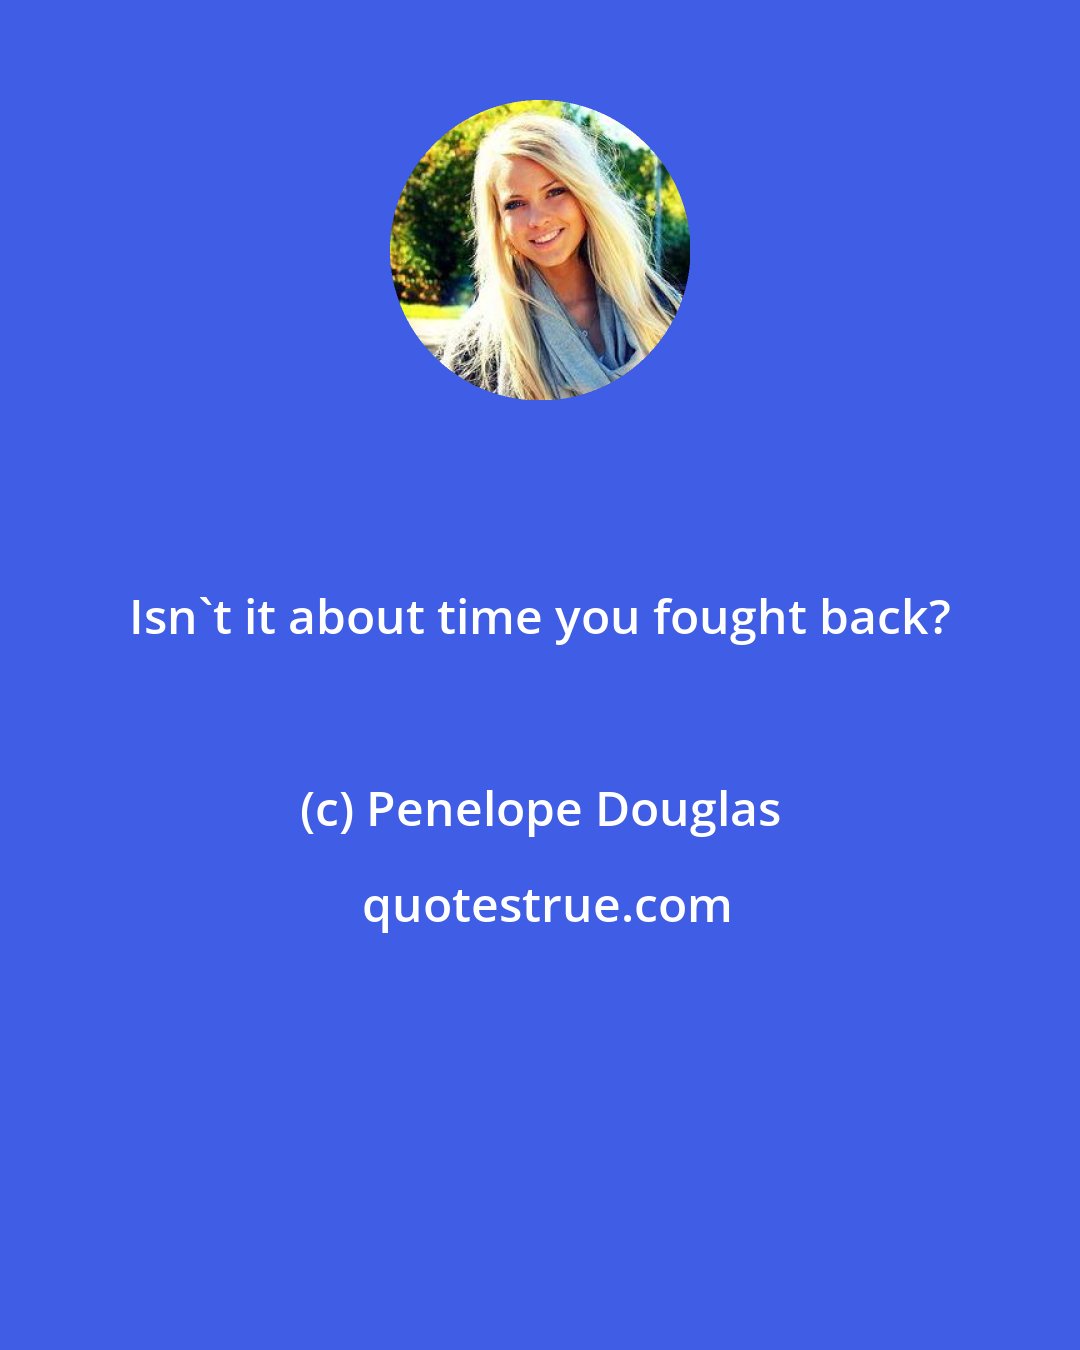 Penelope Douglas: Isn't it about time you fought back?